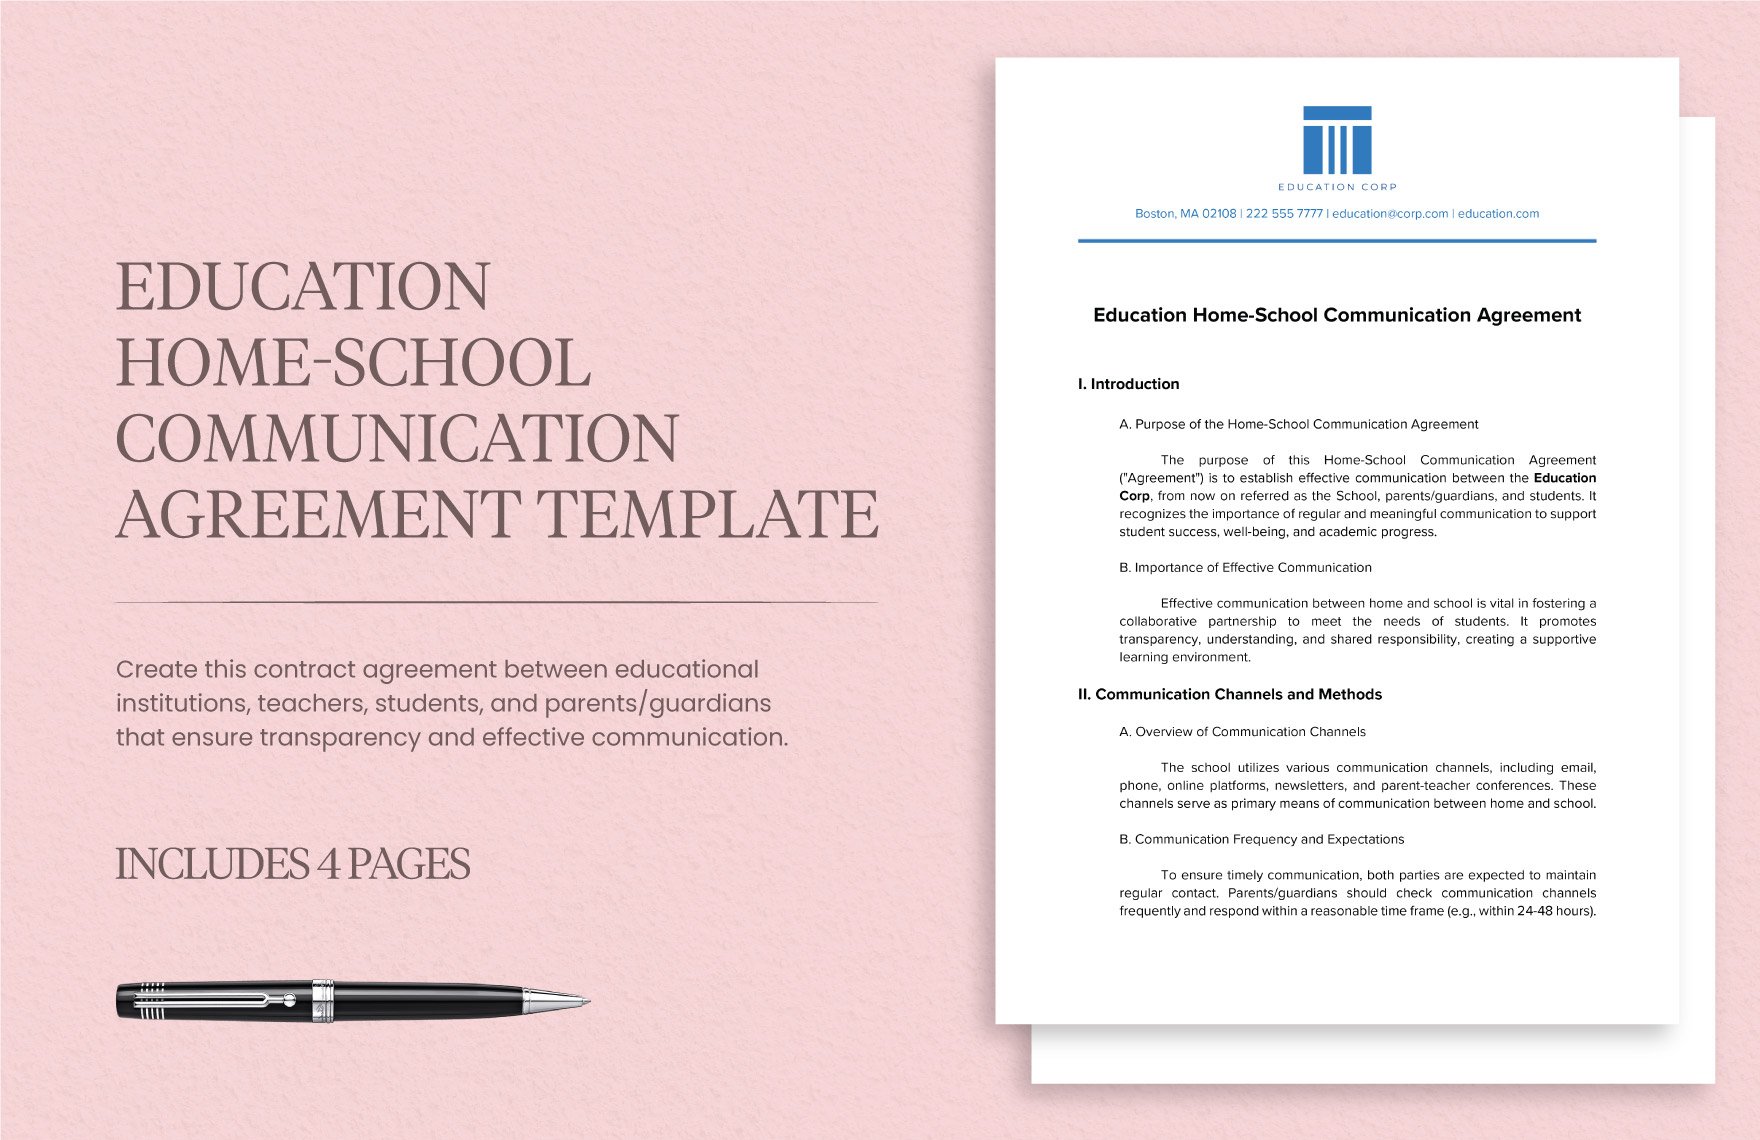 Education Home-School Communication Agreement Template